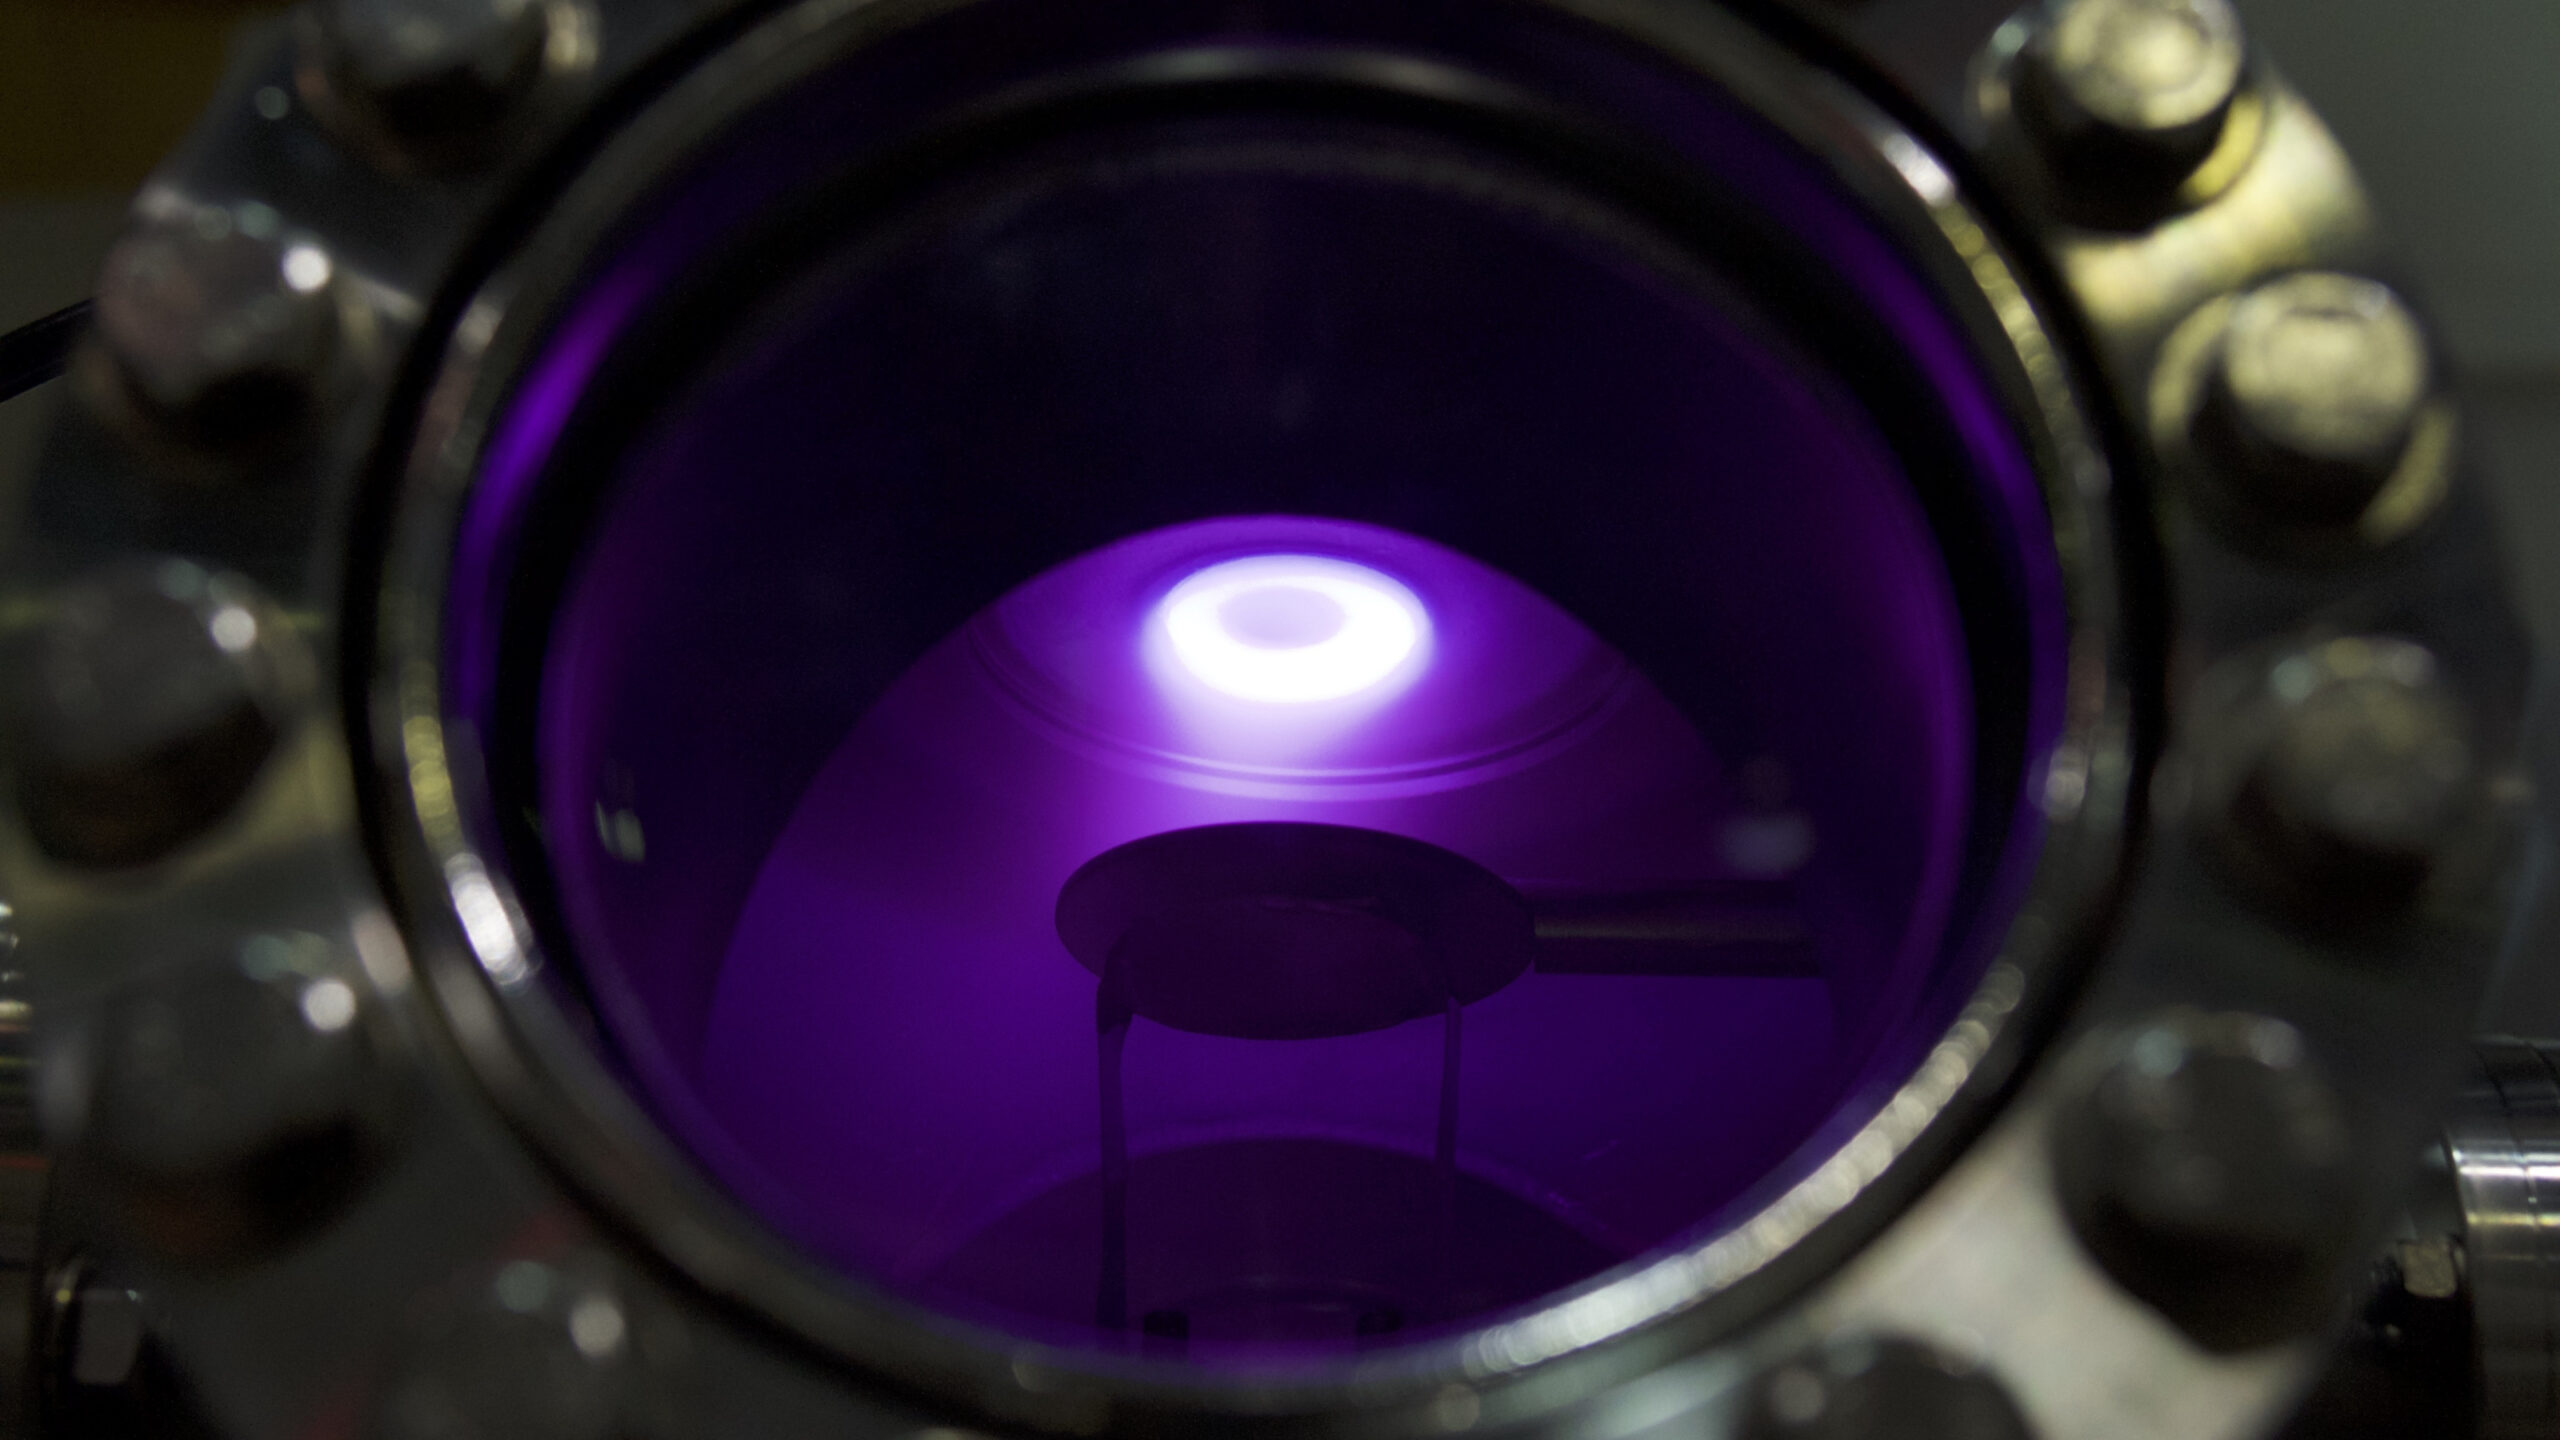 Using a Compact Spectrometer to Detect Spectral Peaks in a Plasma System